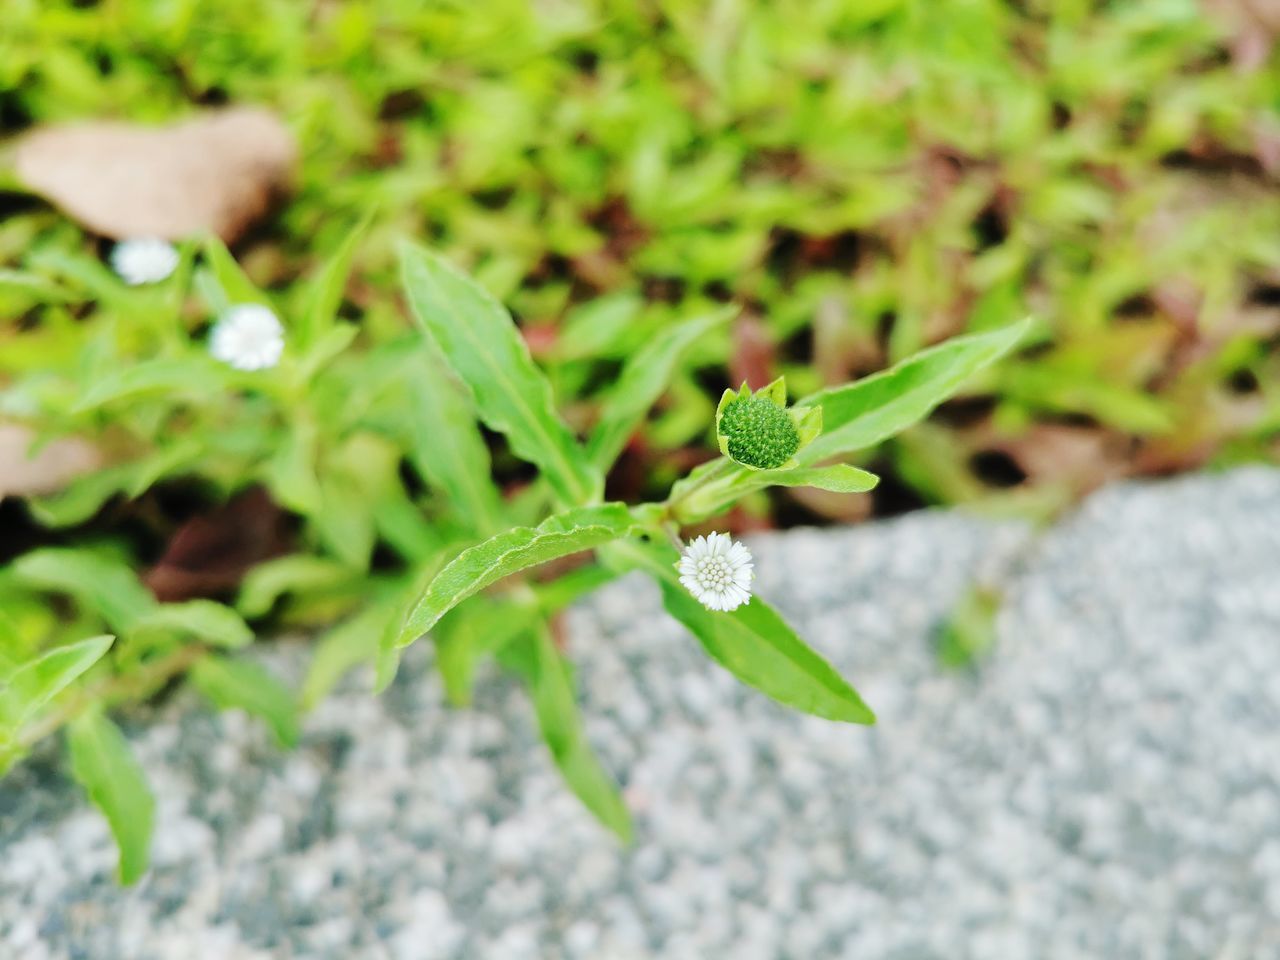 CLOSE-UP OF FLOWER GROWING ON PLANT